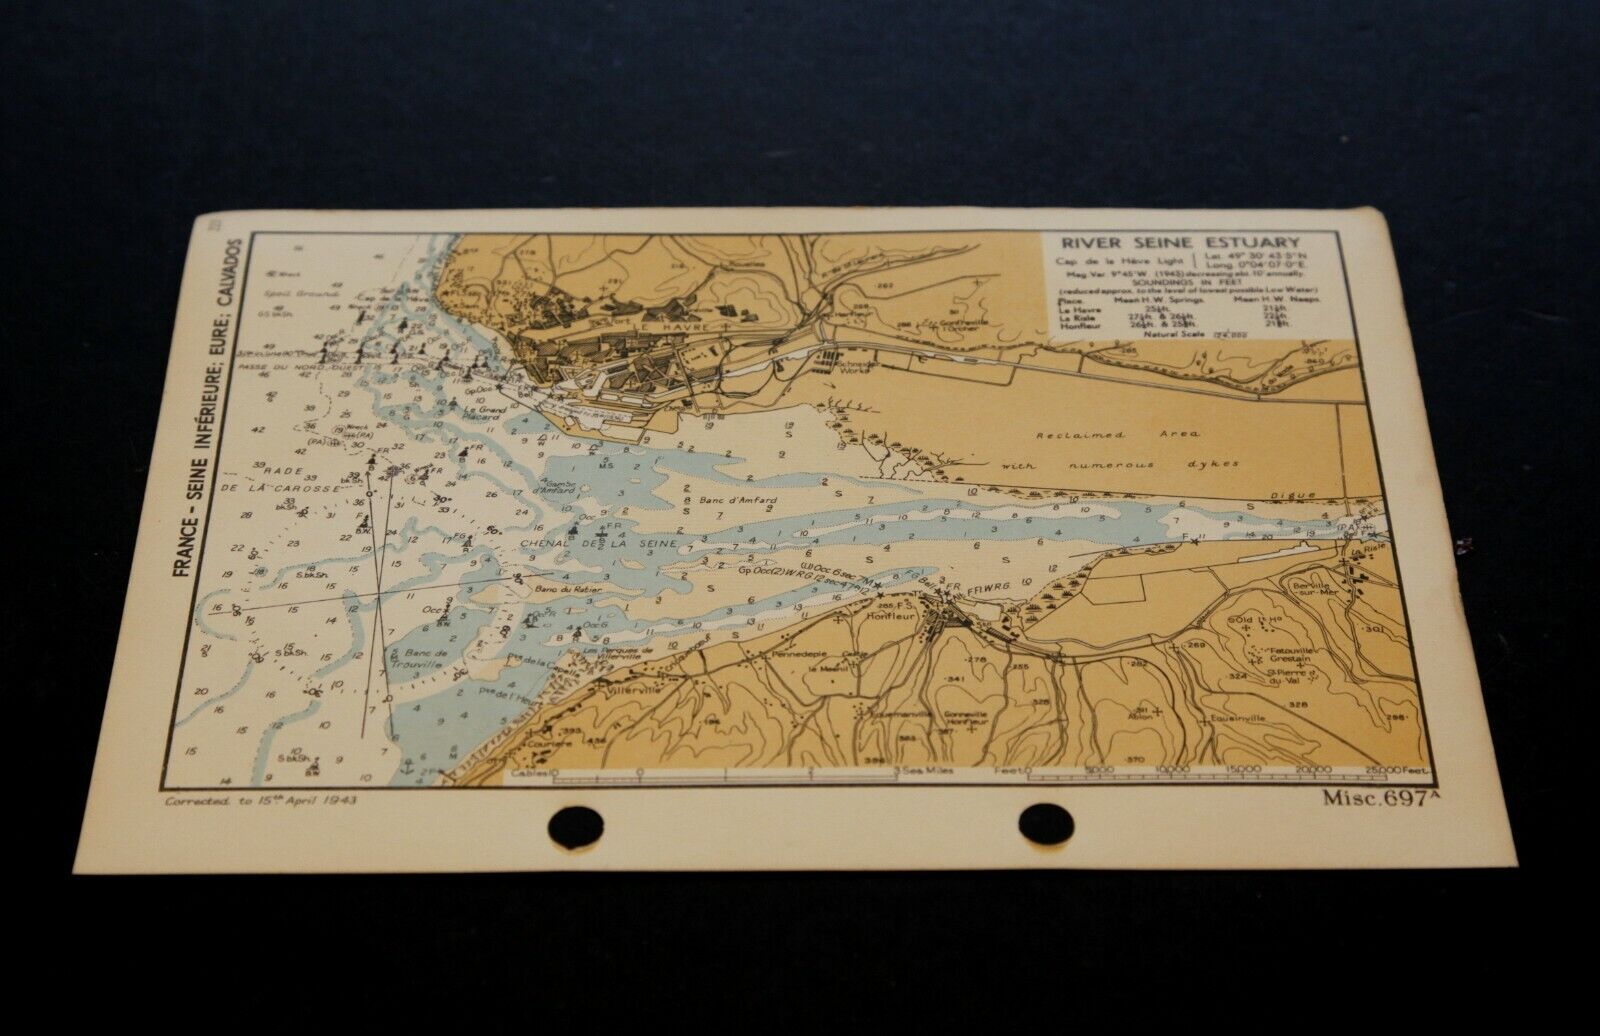 SALE RIVER SEINE ESTUARY, France D-Day Invasion OVERLORD Planning - WW2 Map 1943